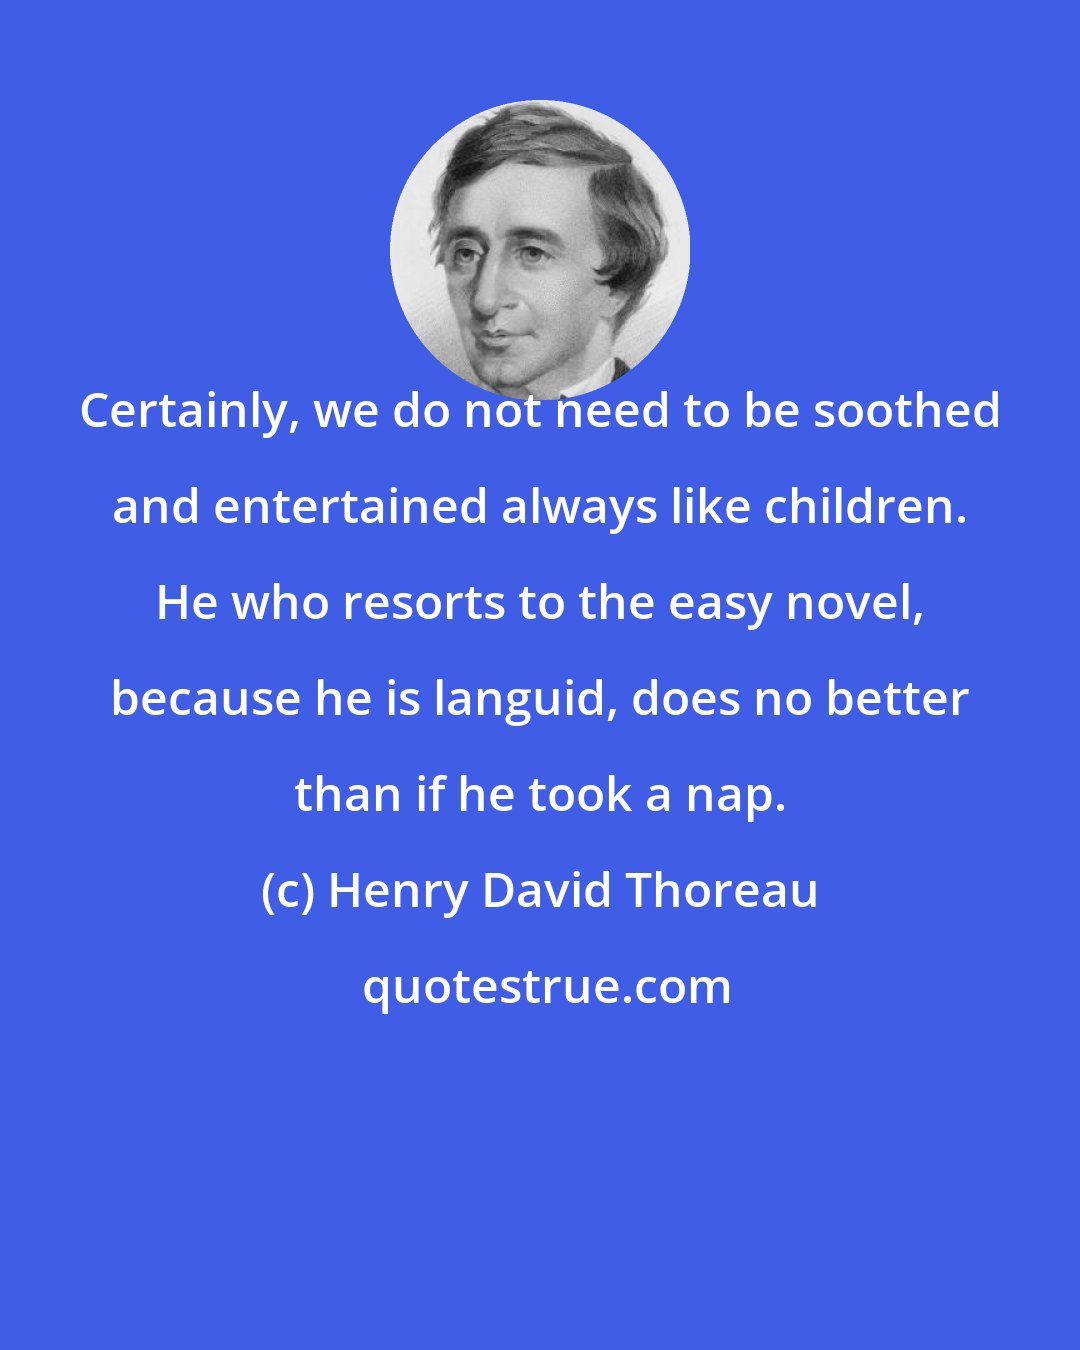 Henry David Thoreau: Certainly, we do not need to be soothed and entertained always like children. He who resorts to the easy novel, because he is languid, does no better than if he took a nap.